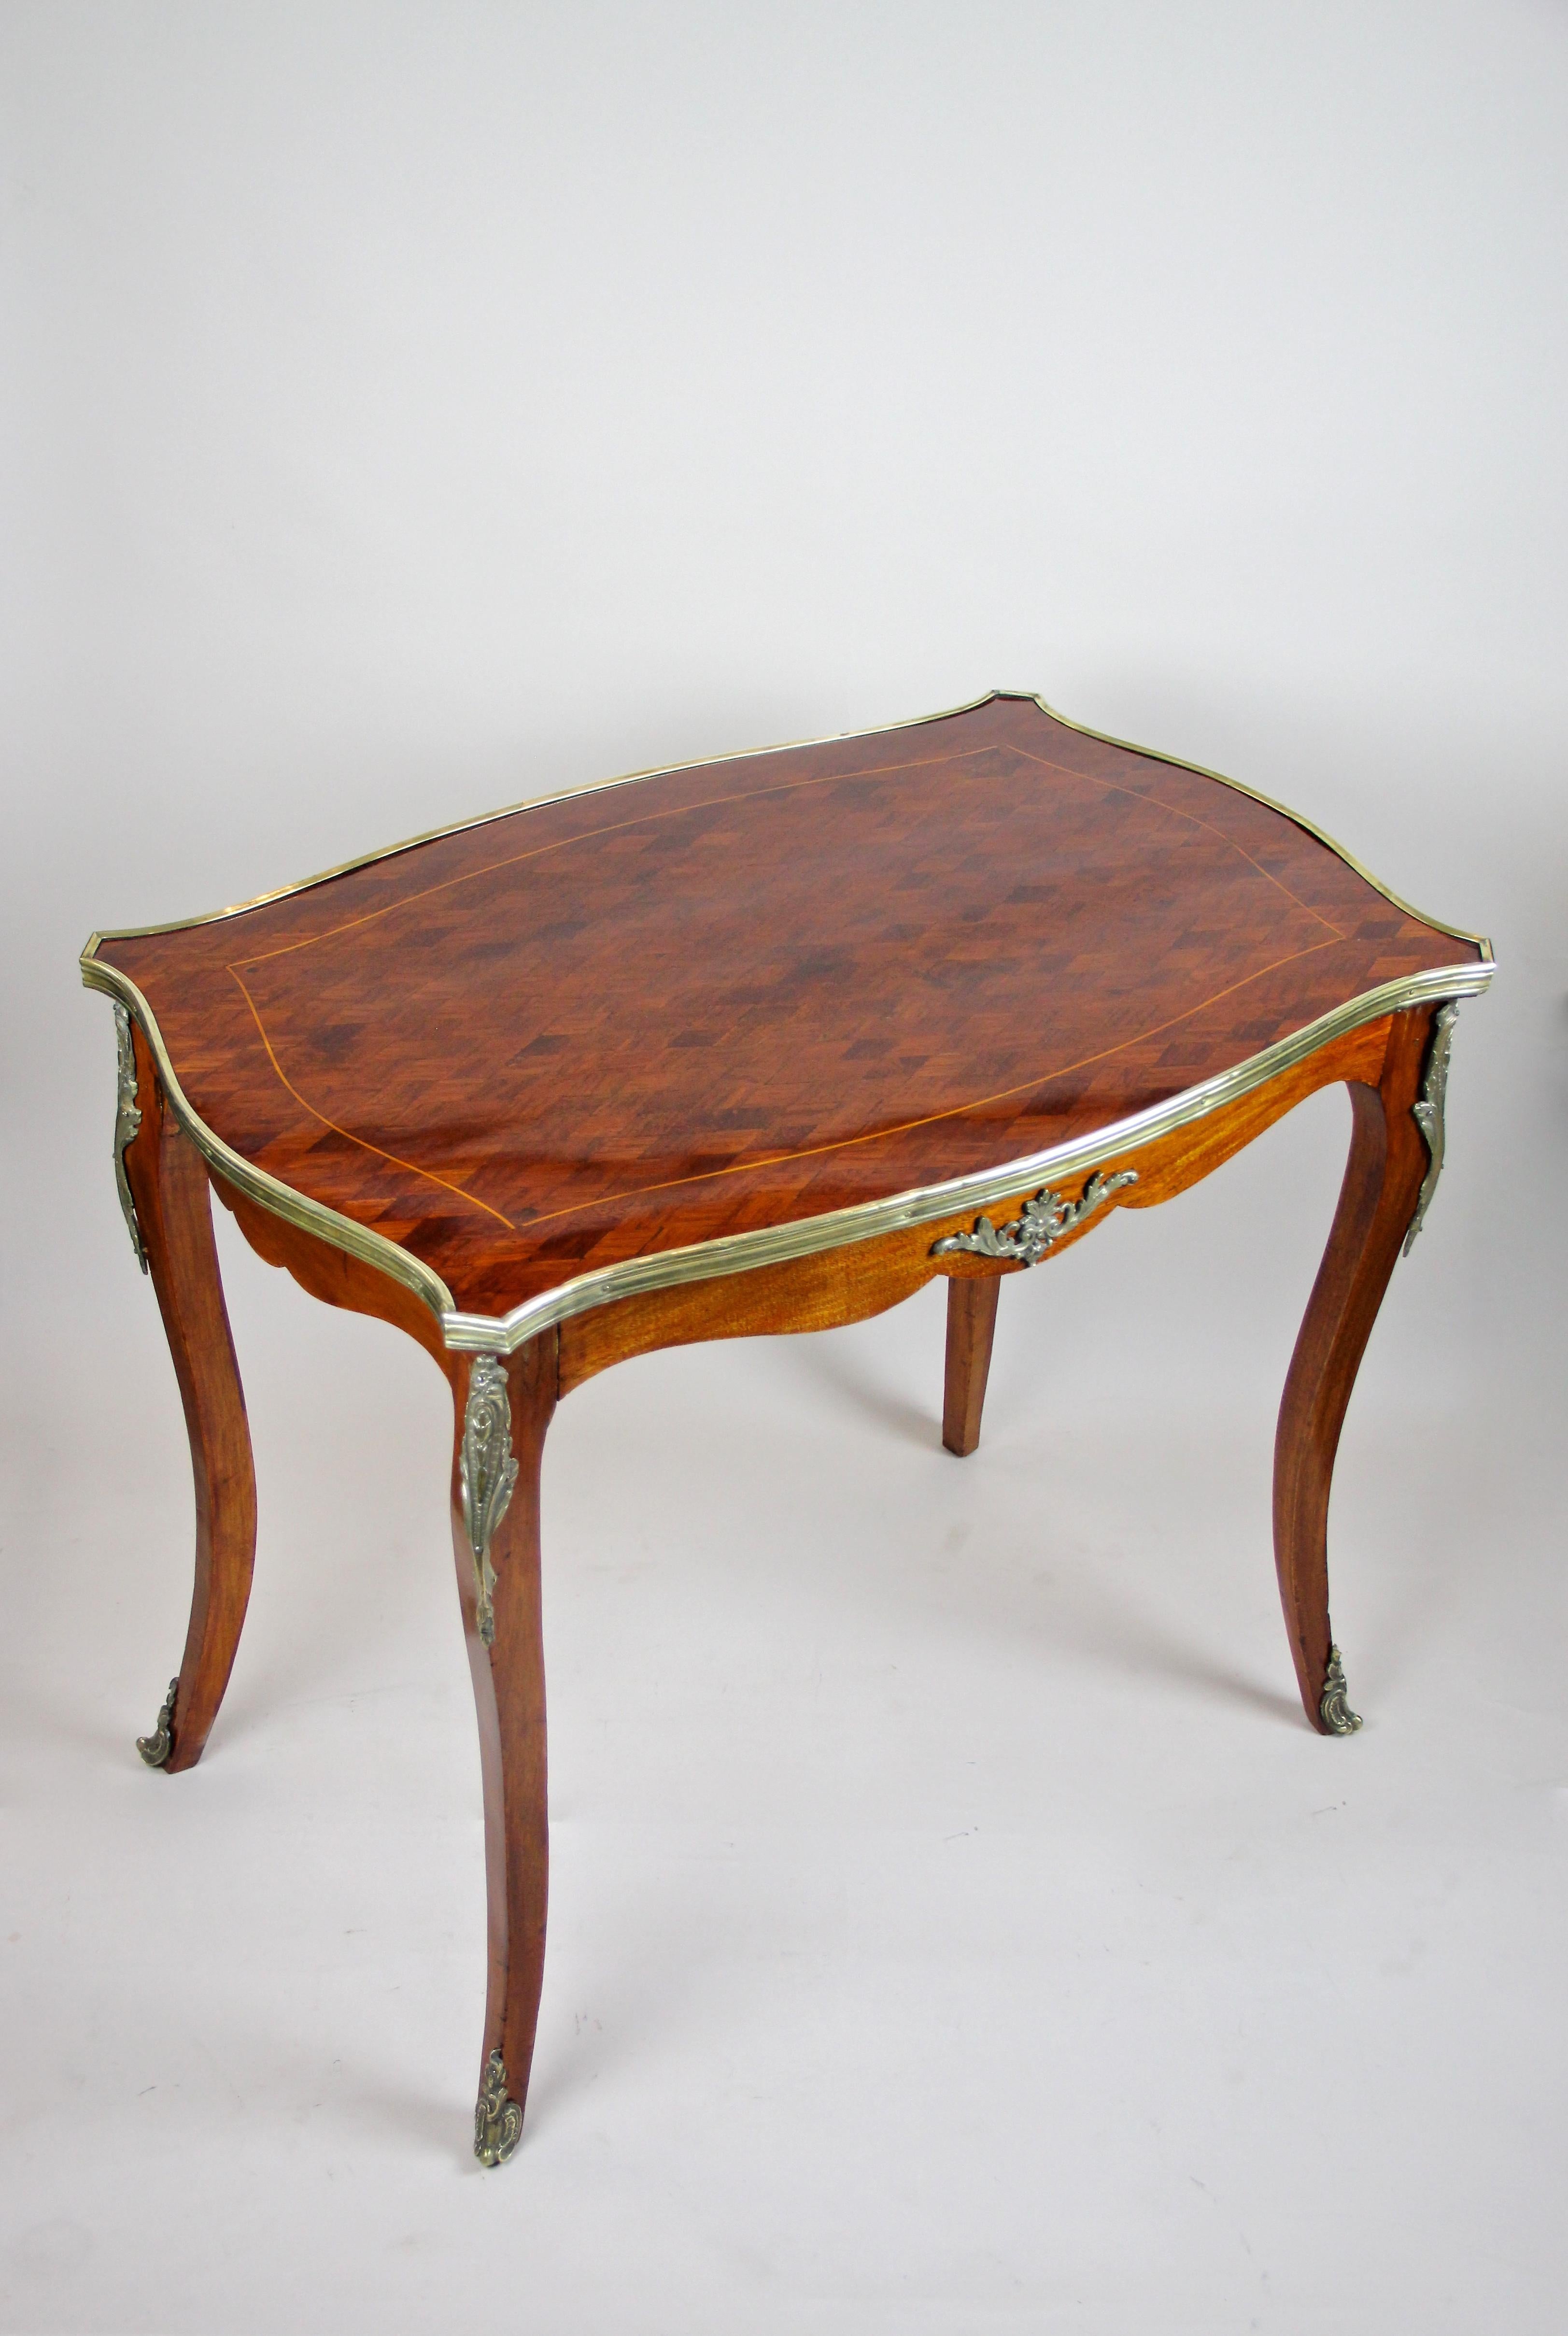 Fresh out of our restoration workshop comes this fantastic French marquetry side table from the period Napoleon III, circa 1870. Well known for their unique style the French carpenters were true masters when it comes to elaborate furniture. An